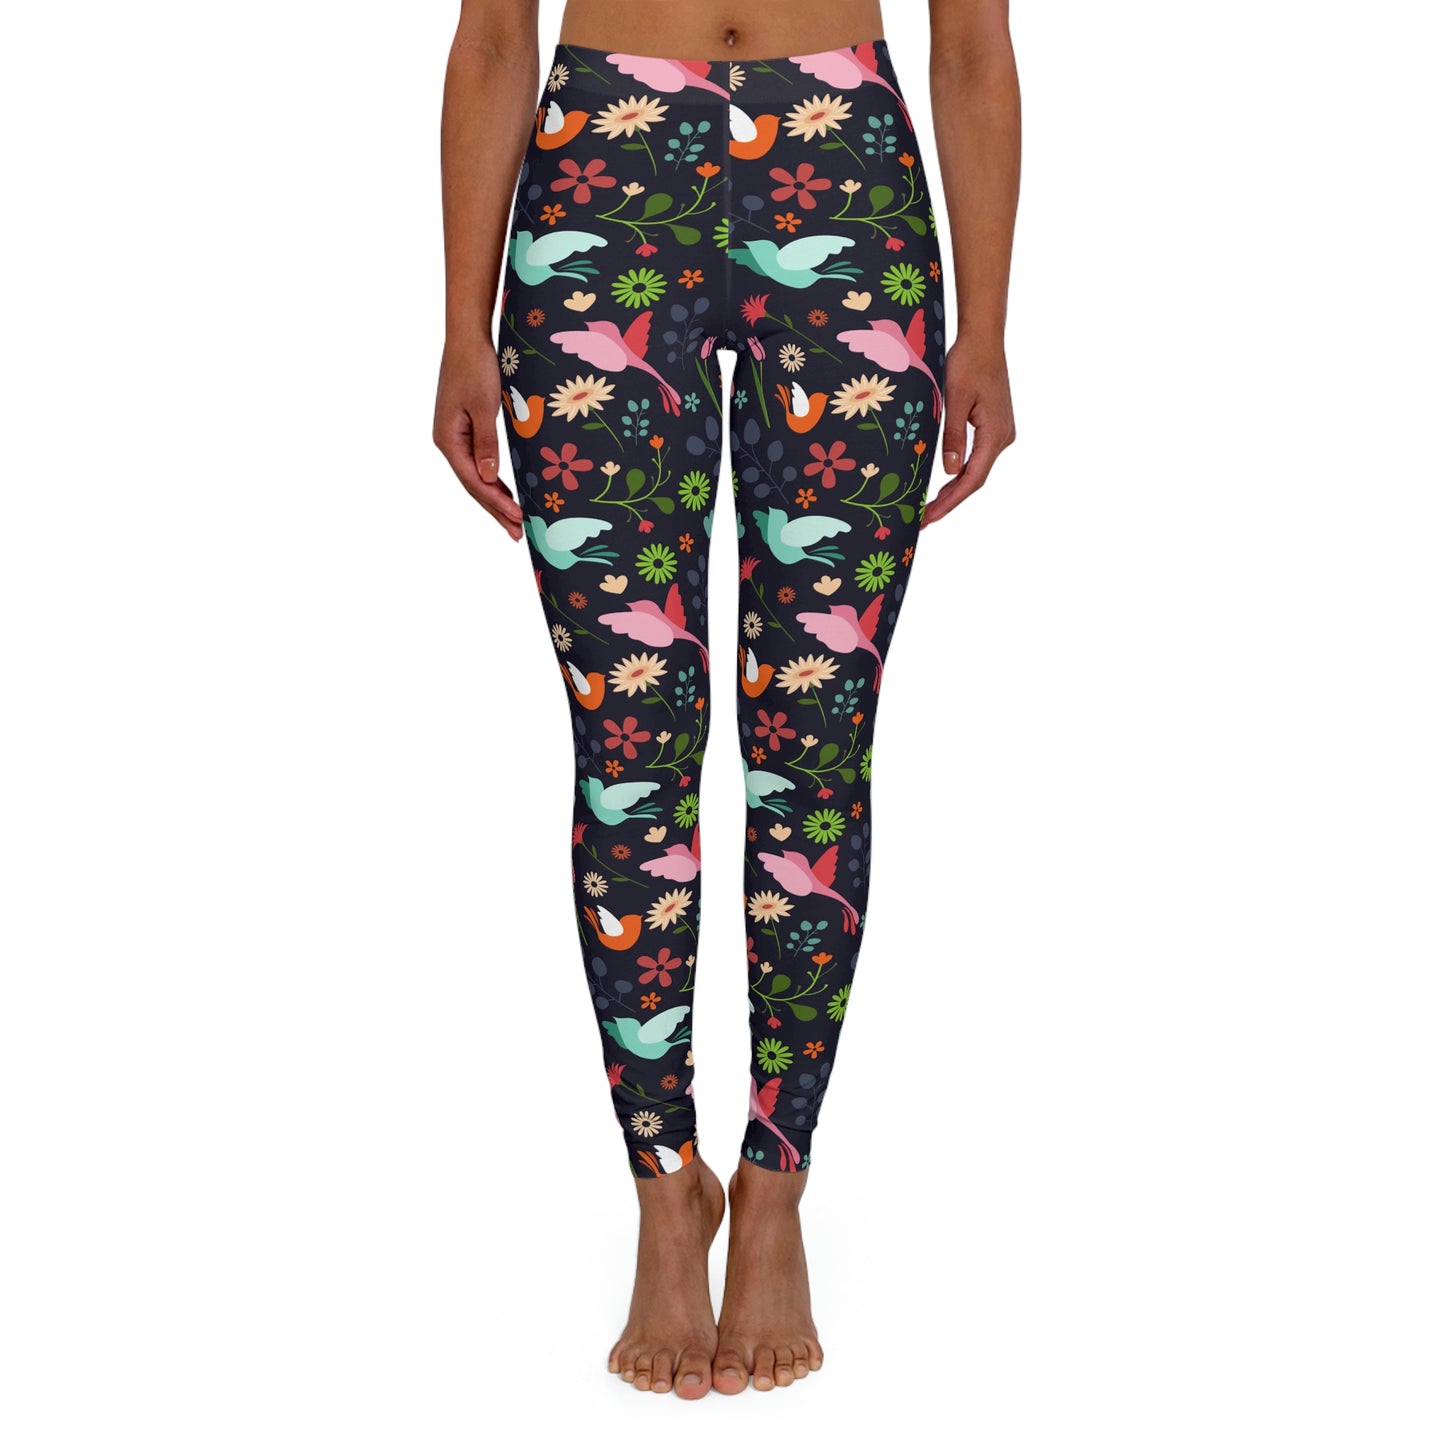 Hummingbird Safari Animal Kingdom  Women Leggings . One of a Kind Workout Activewear tights for Mothers Day, Girlfriend, Gift for Her